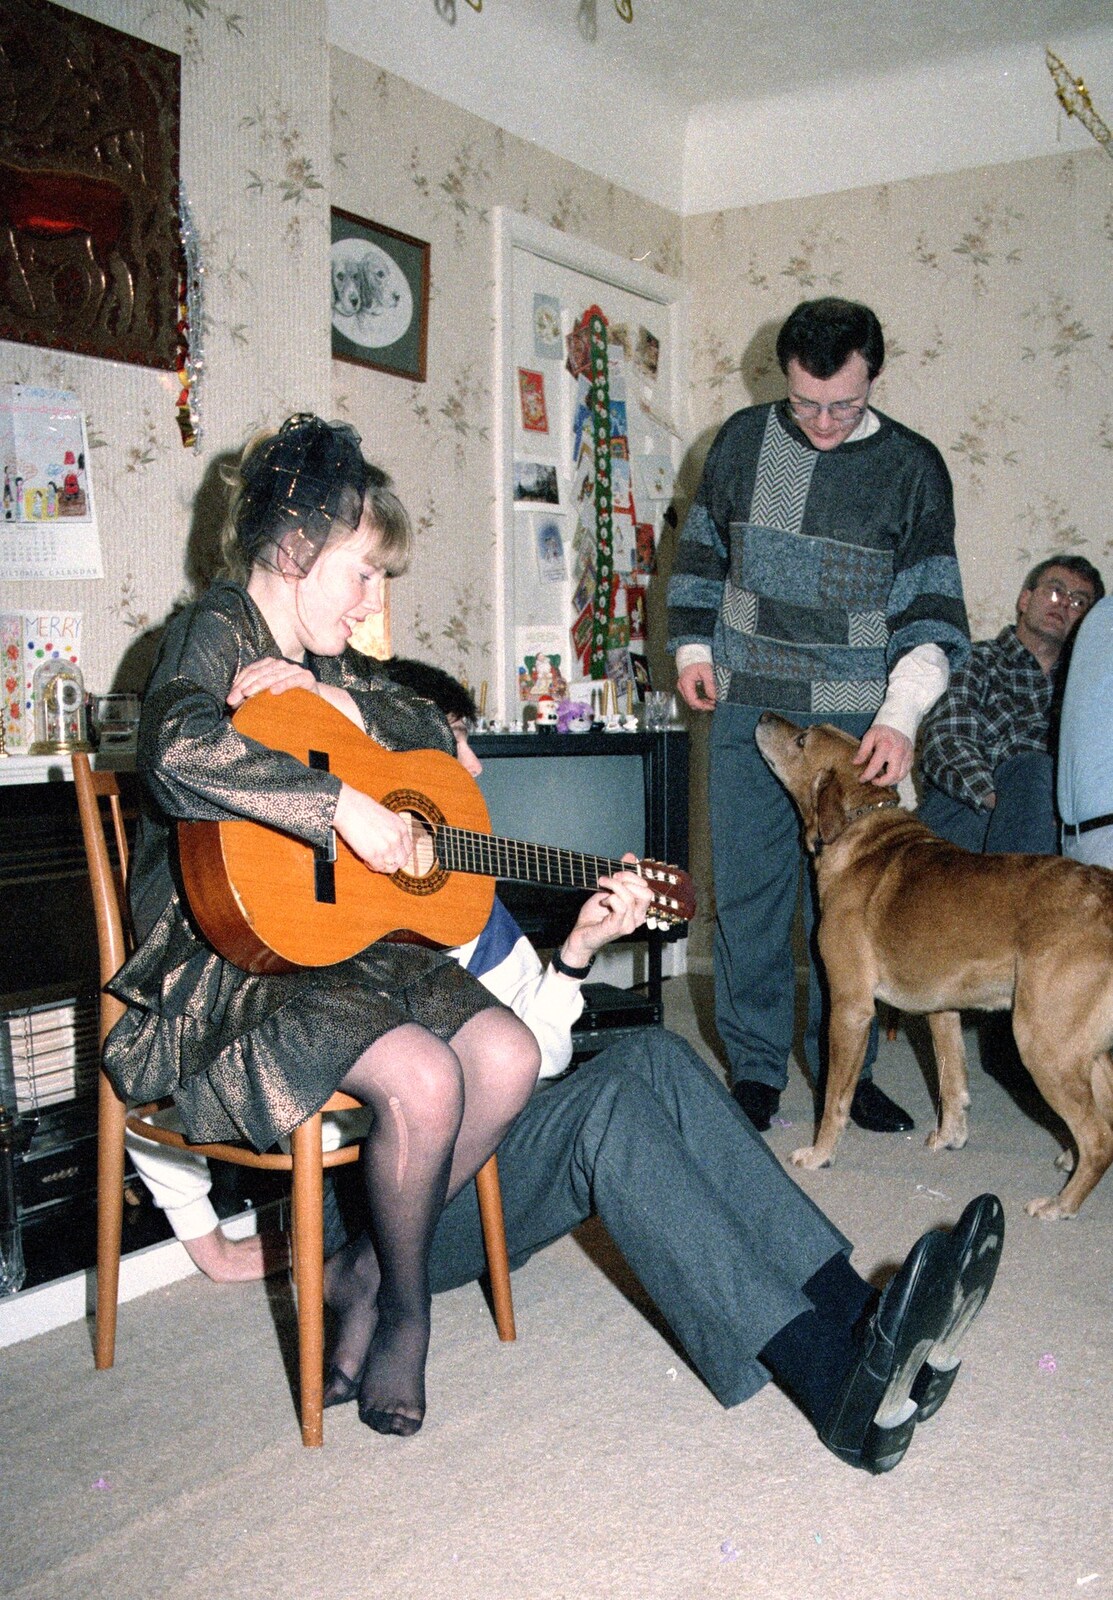 Jenny entertains us with some guitar from New Year's Eve at Hamish's, New Milton, Hampshire - 31st December 1988